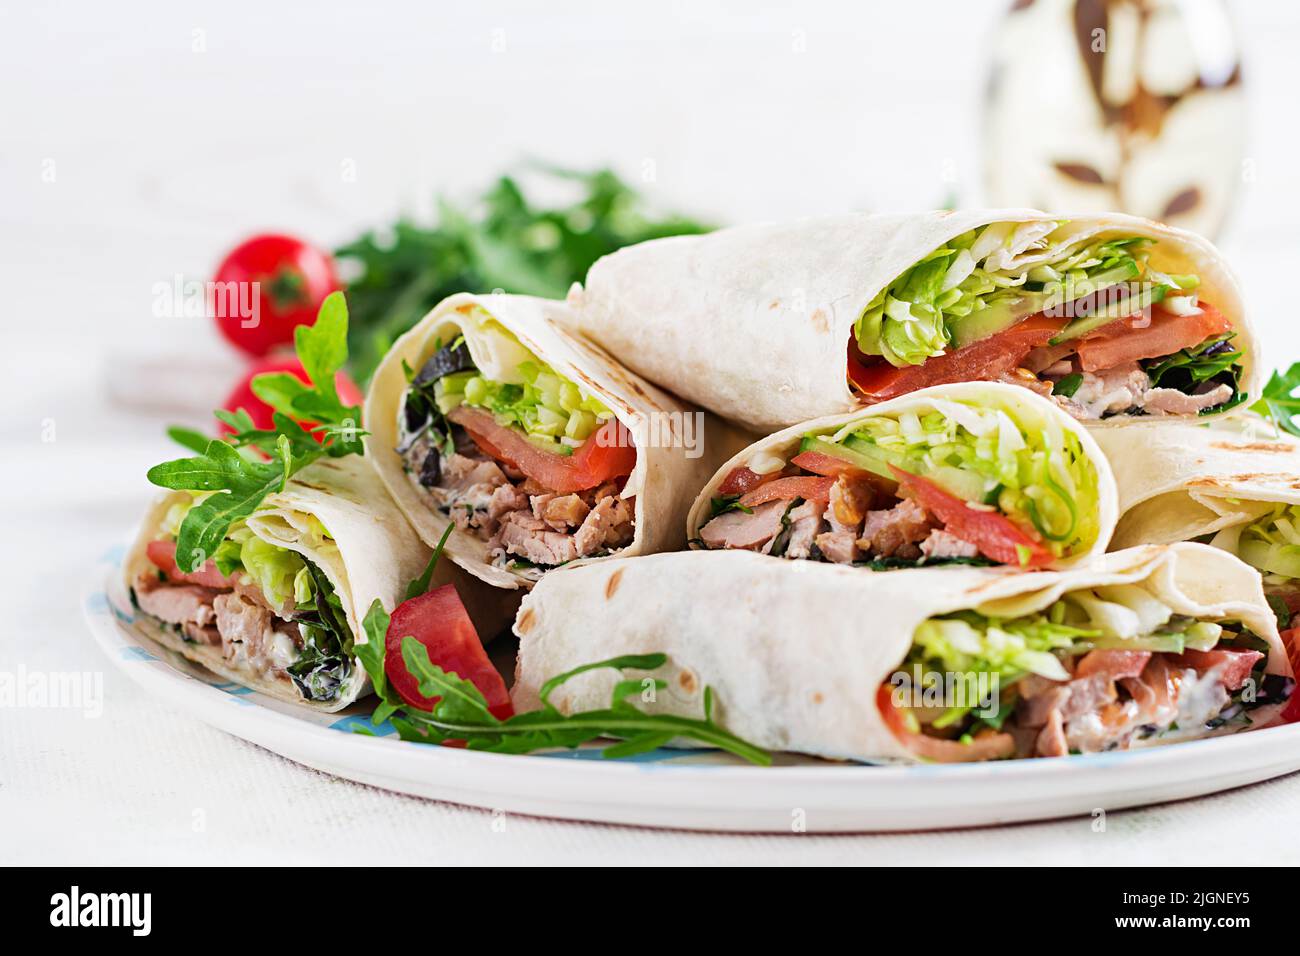 Burritos wraps with beef and vegetables on light  background. Beef tortilla, mexican food. Stock Photo